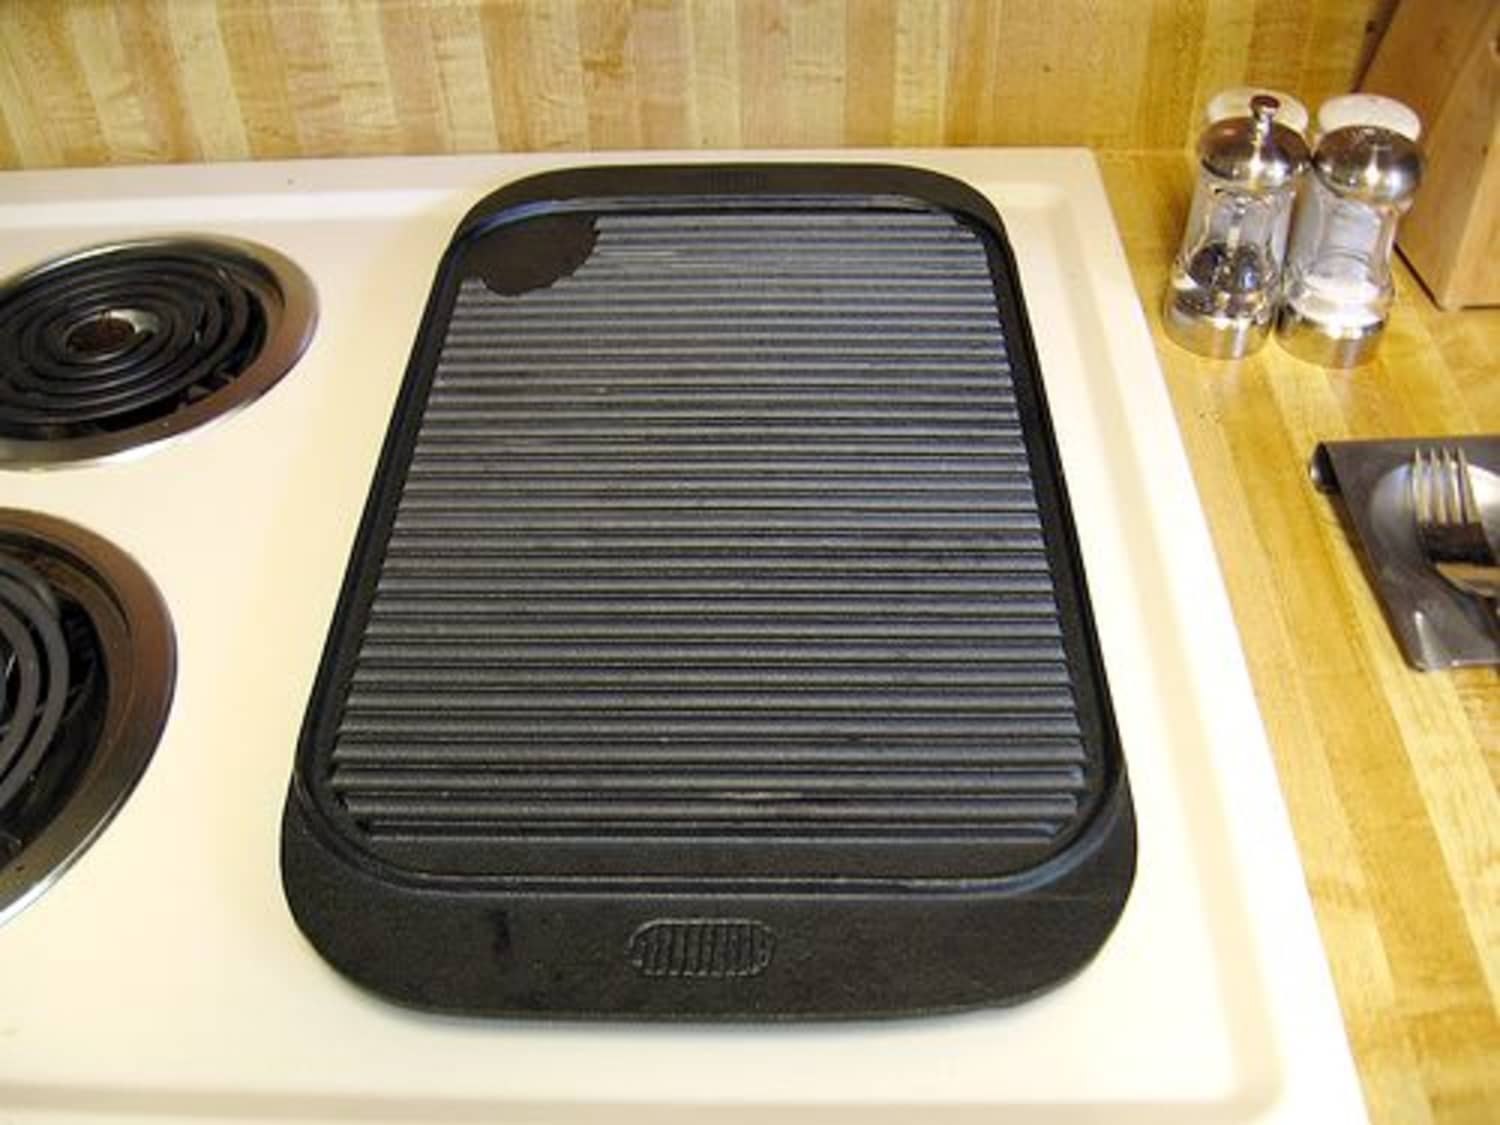 How to Use a Stovetop Griddle on a Gas Range